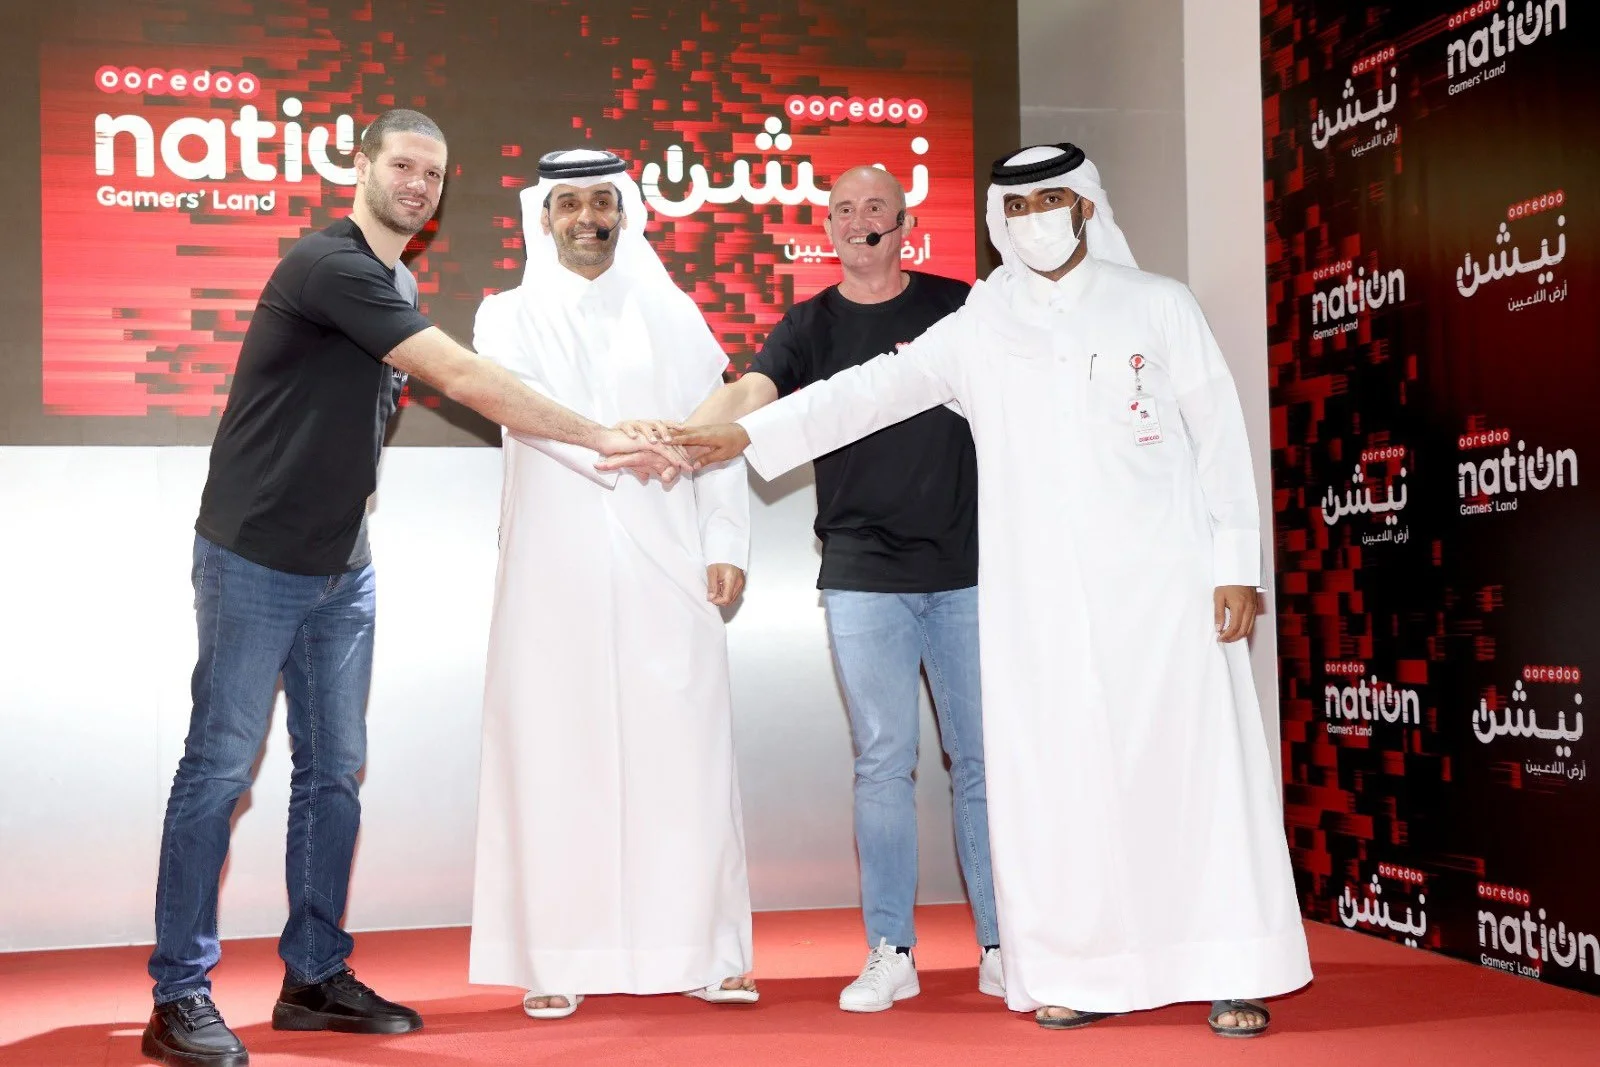 Ooredoo as a community-focused company cares about social and economic progress